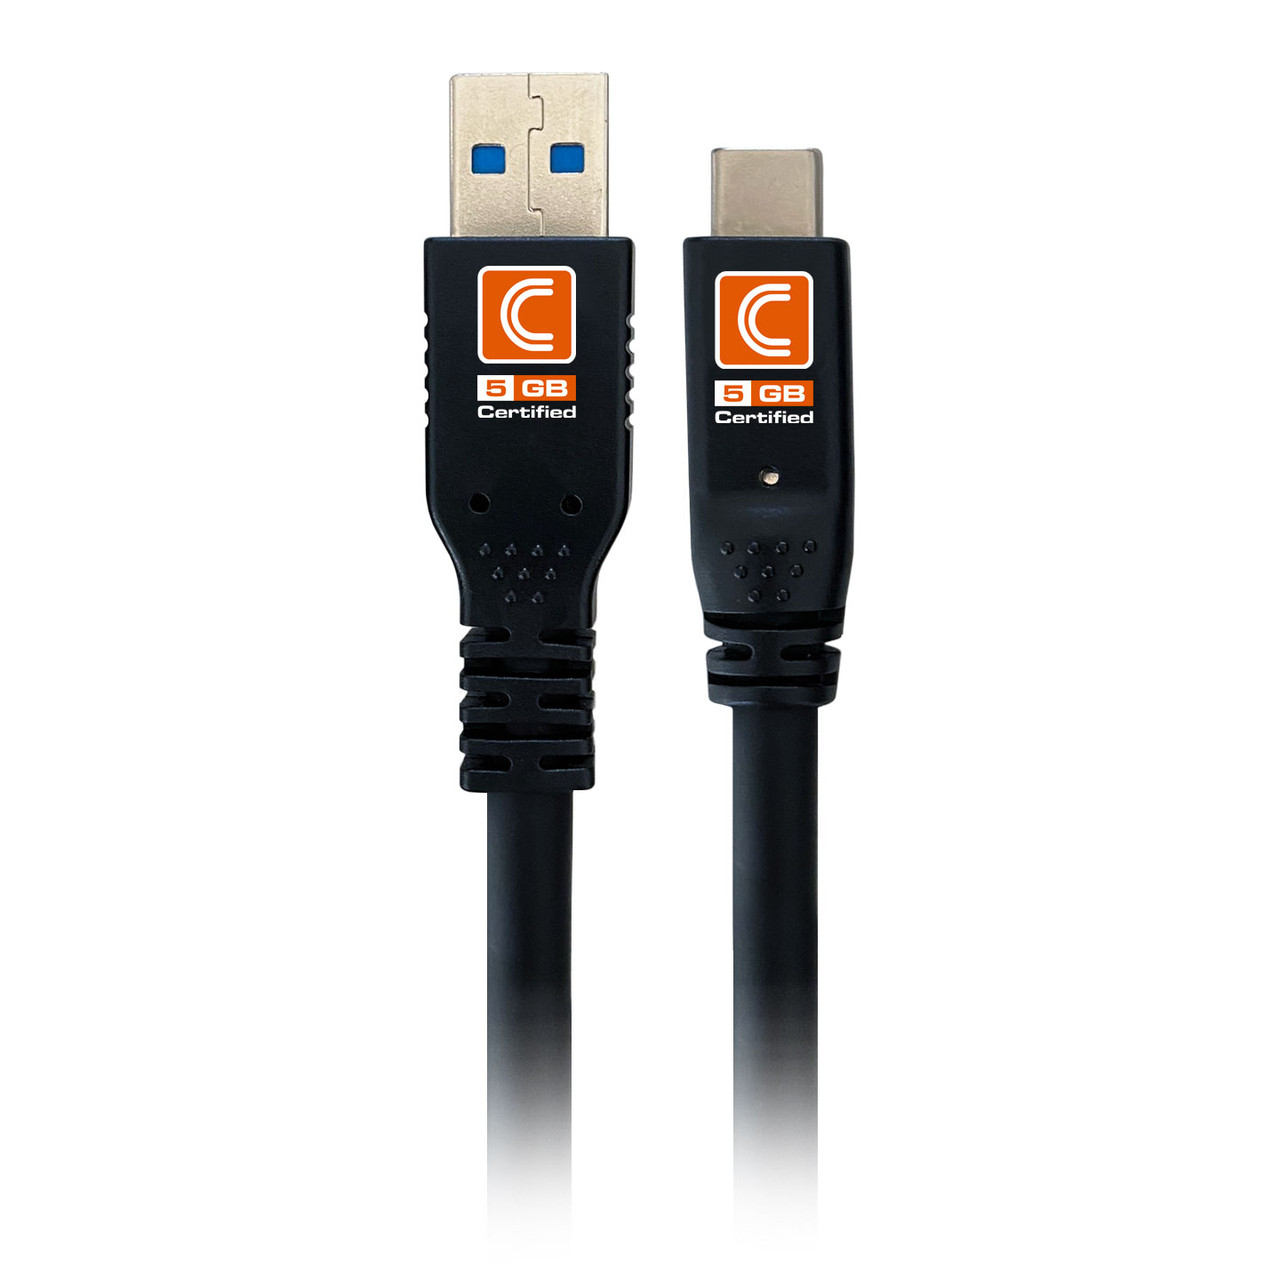 C-USB3/AA USB 3.0 A (M) to A (M) Cable